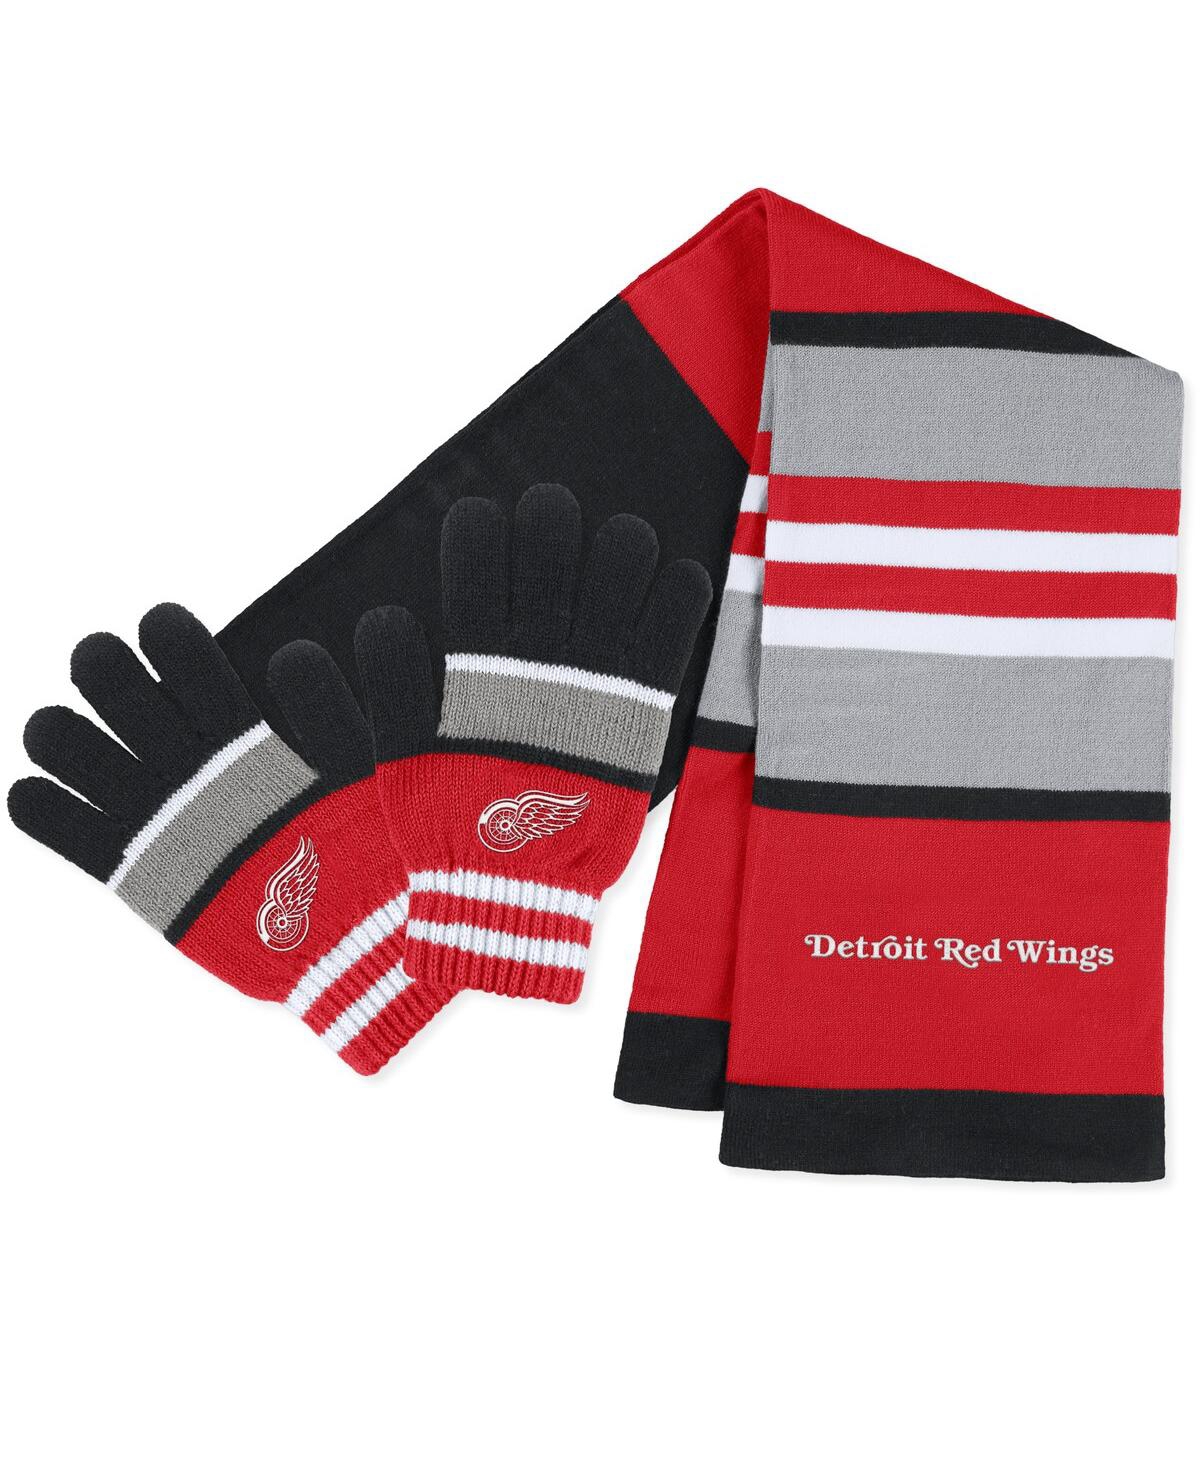 Women's Wear by Erin Andrews Detroit Red Wings Stripe Glove and Scarf Set - Black, Red